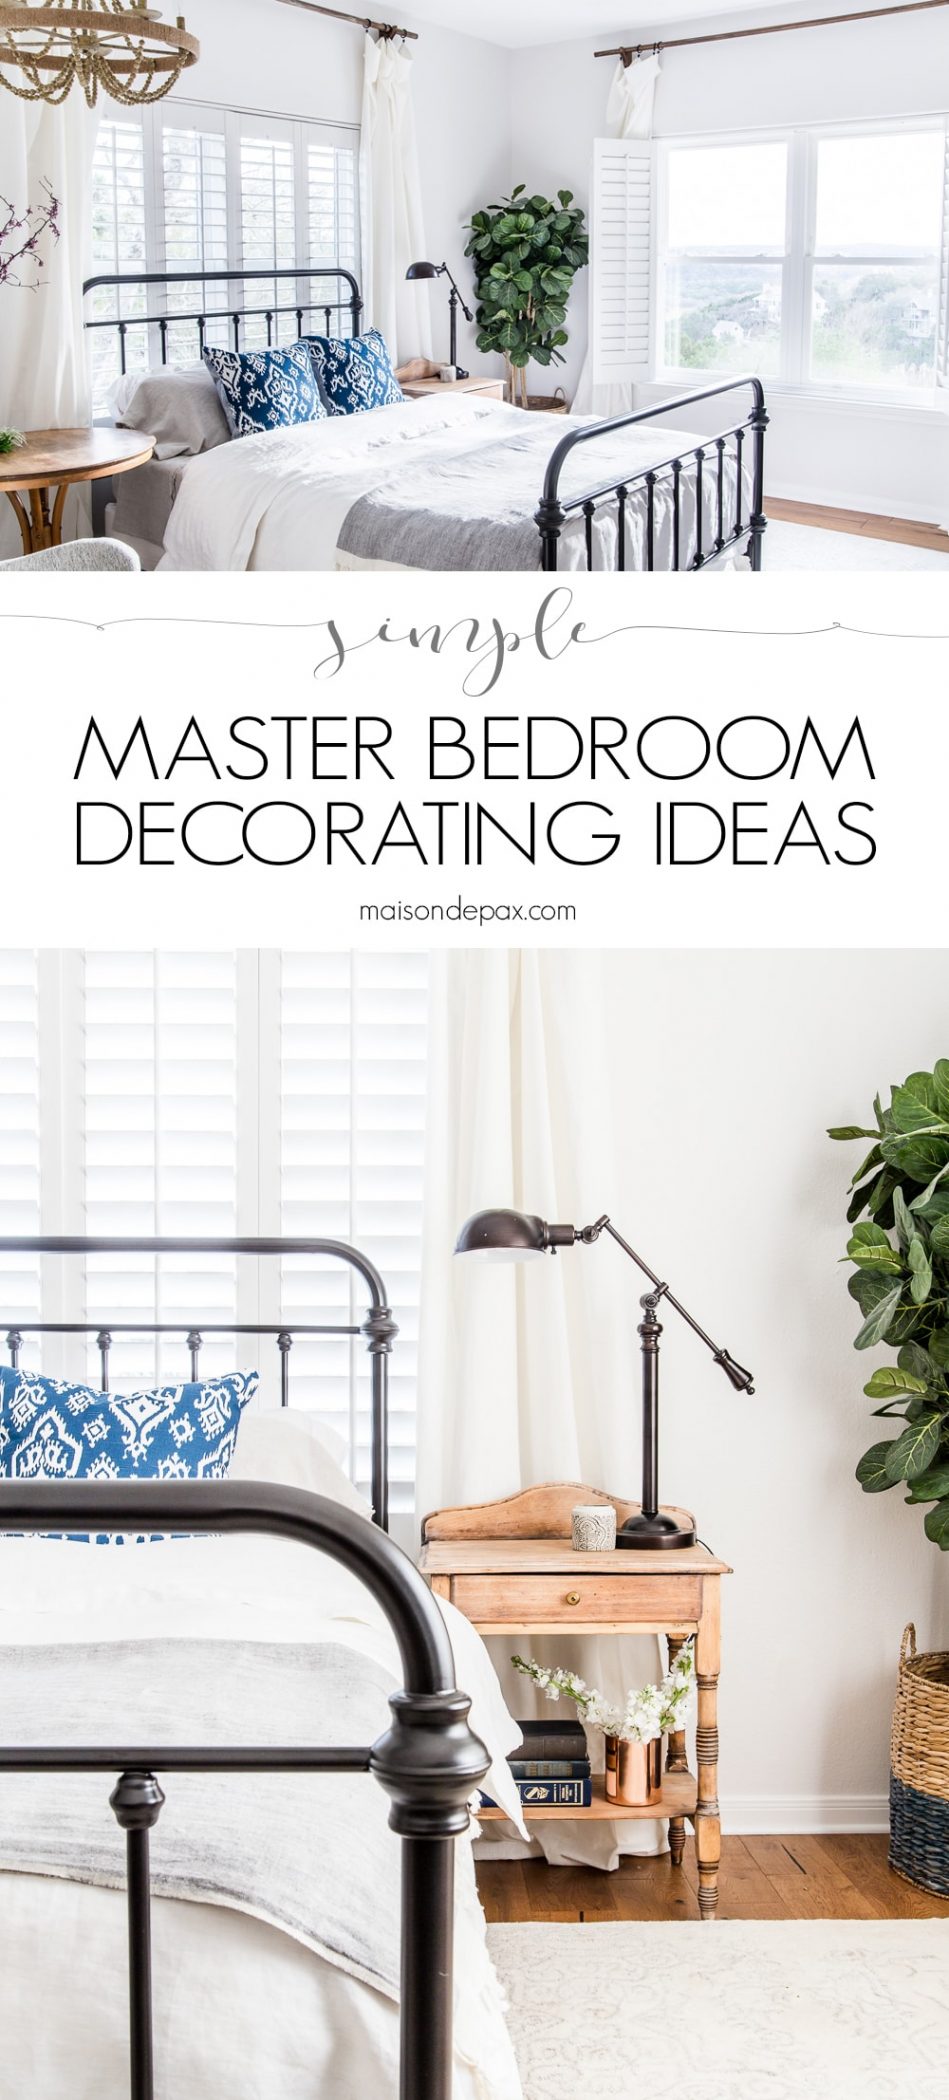 Looking to add a seasonal touch to your bedroom?  Don't miss these incredibly simple master bedroom decorating ideas for spring! #springdecor #springbedroom #nightstand #modernfarmhouse